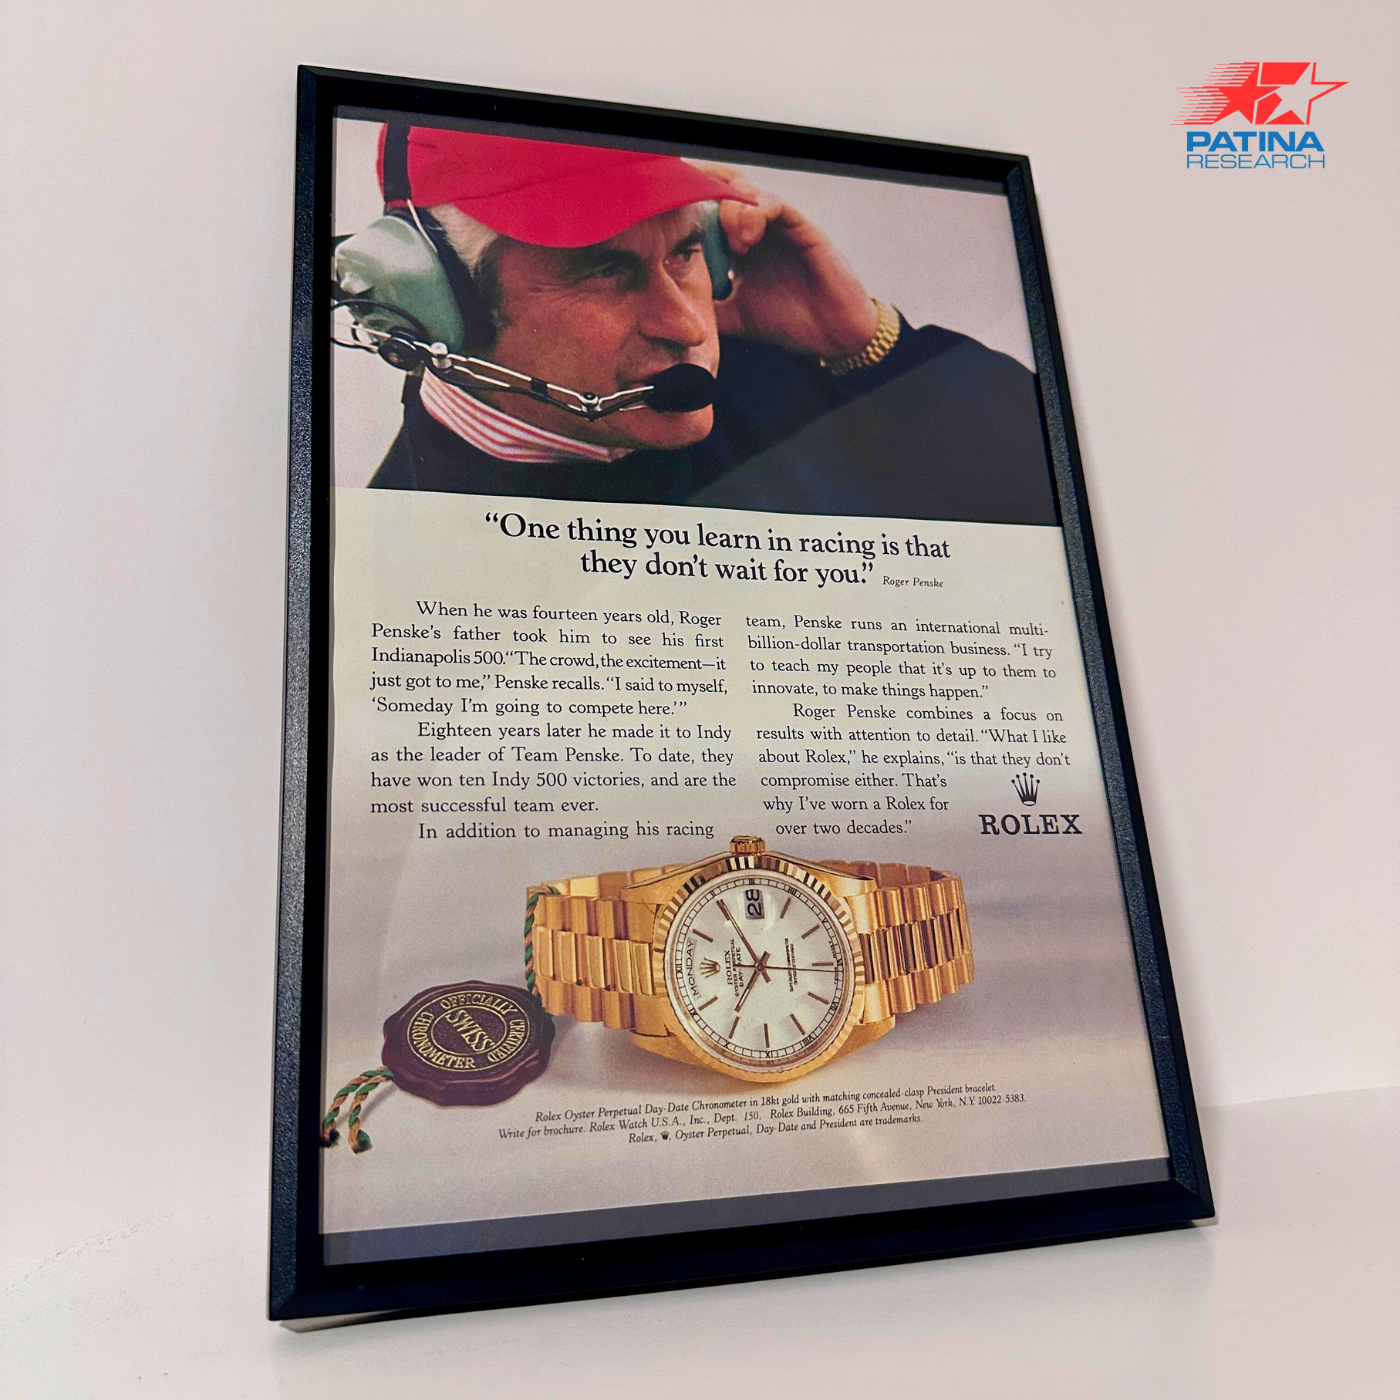 Rolex learn in racing framed ad